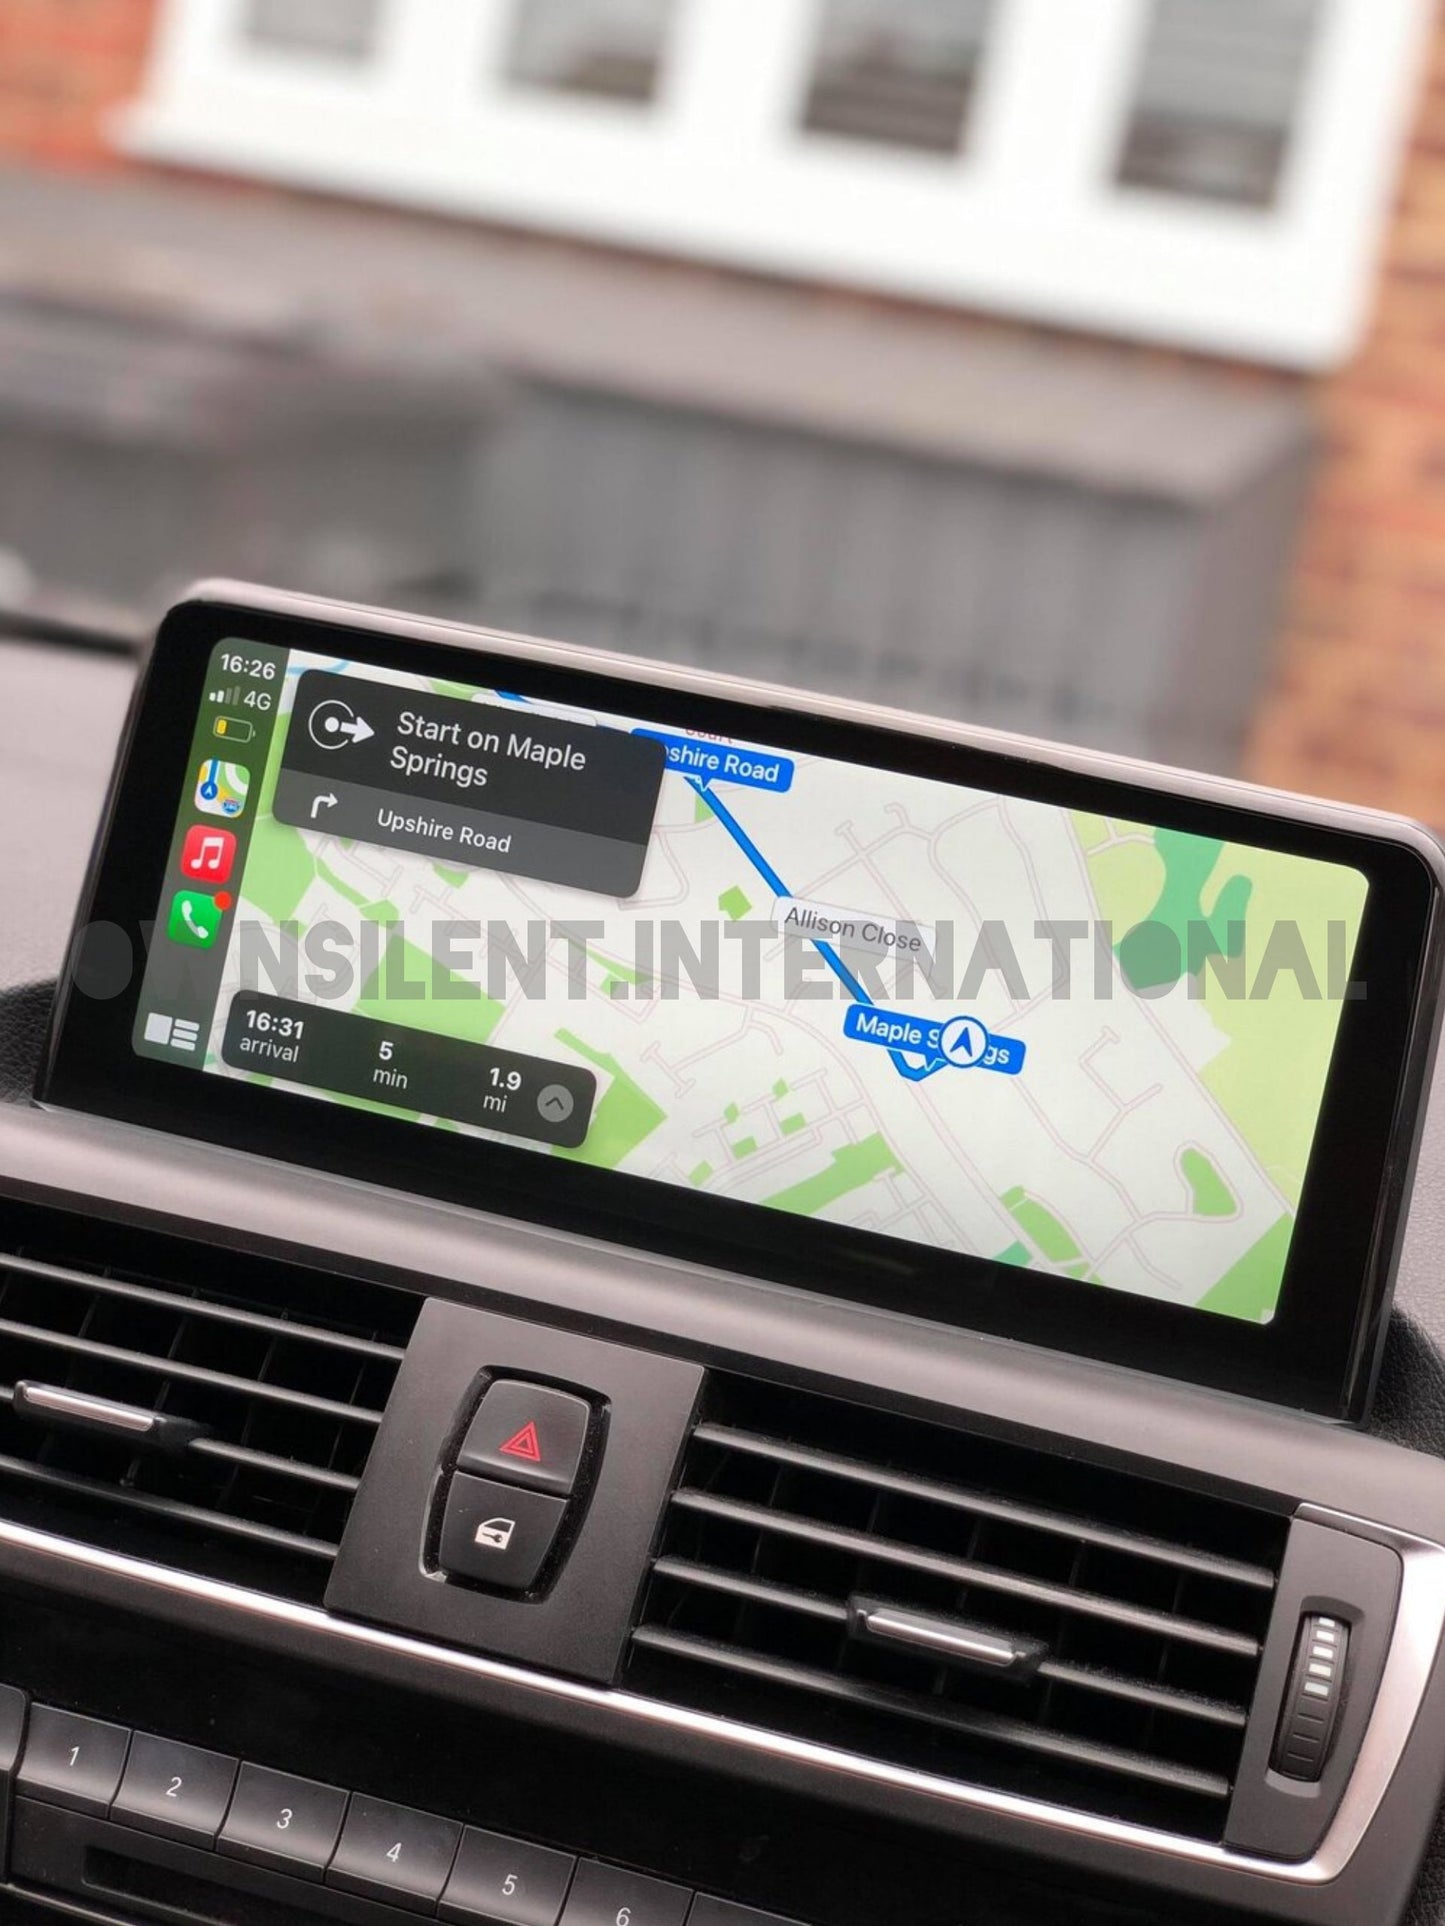 BMW 2 SERIES (2013-2016) 10.25" ANDROID MULTIMEDIA SYSTEM (F22 F23)

CARPLAY ANDROID AUTO DSP